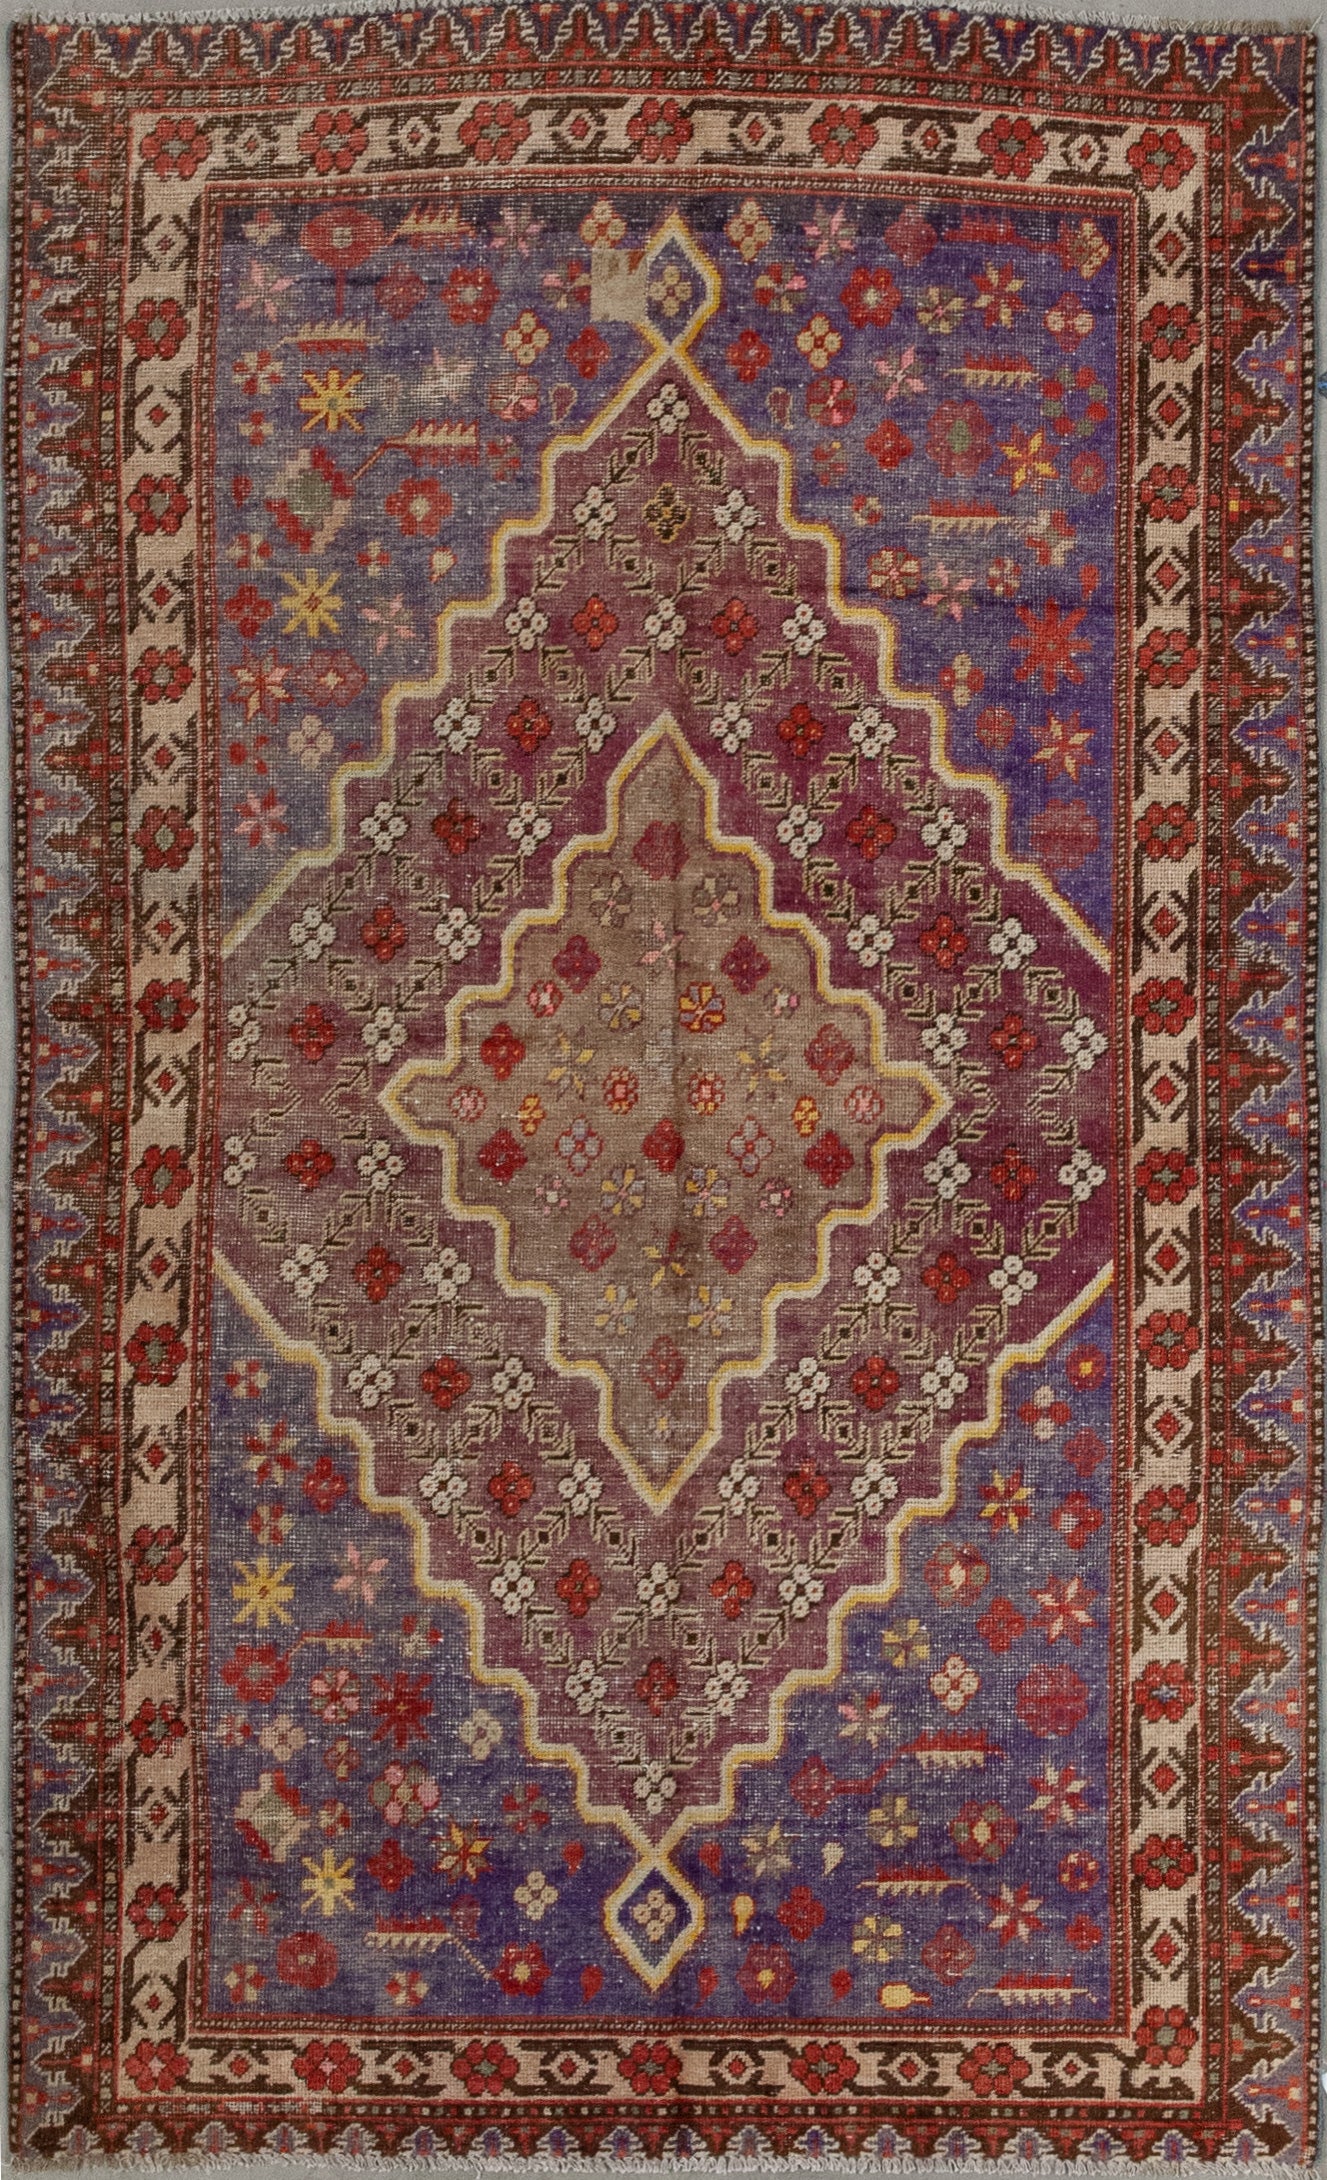 This wonderful carpet was woven with a joyful color scheme which has blue, burgundy, brown, yellow, red, and white. The main design features a large central rhomb holding a nested one, and both shapes contain a flowers pattern.